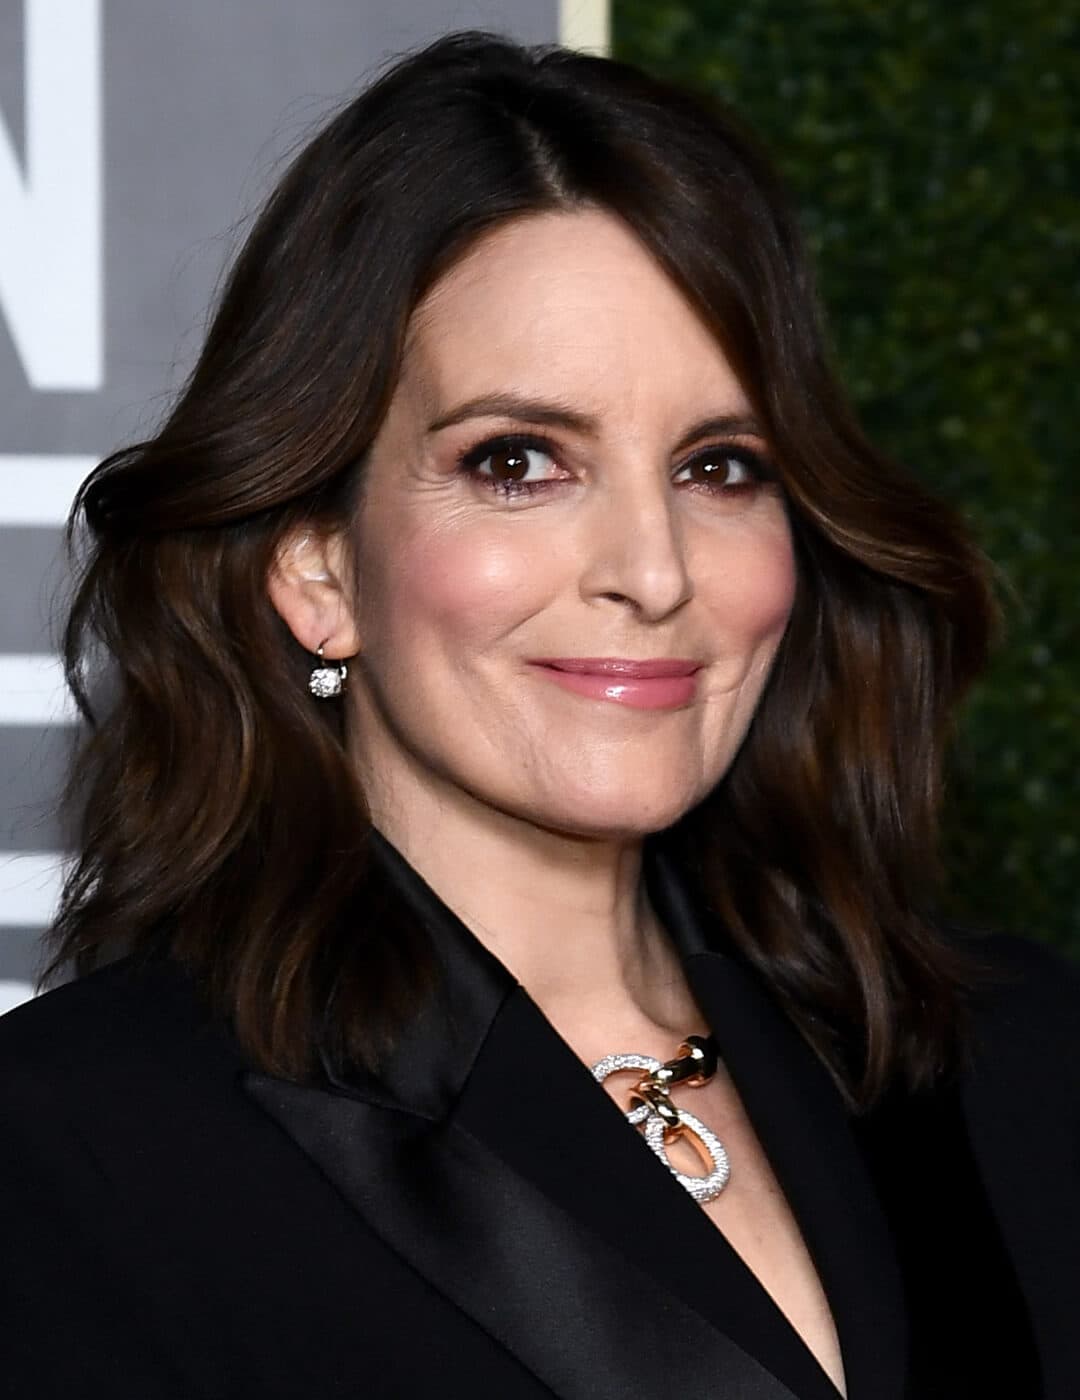 Tina Fey looking glam in a voluminous hairstyle and black suit